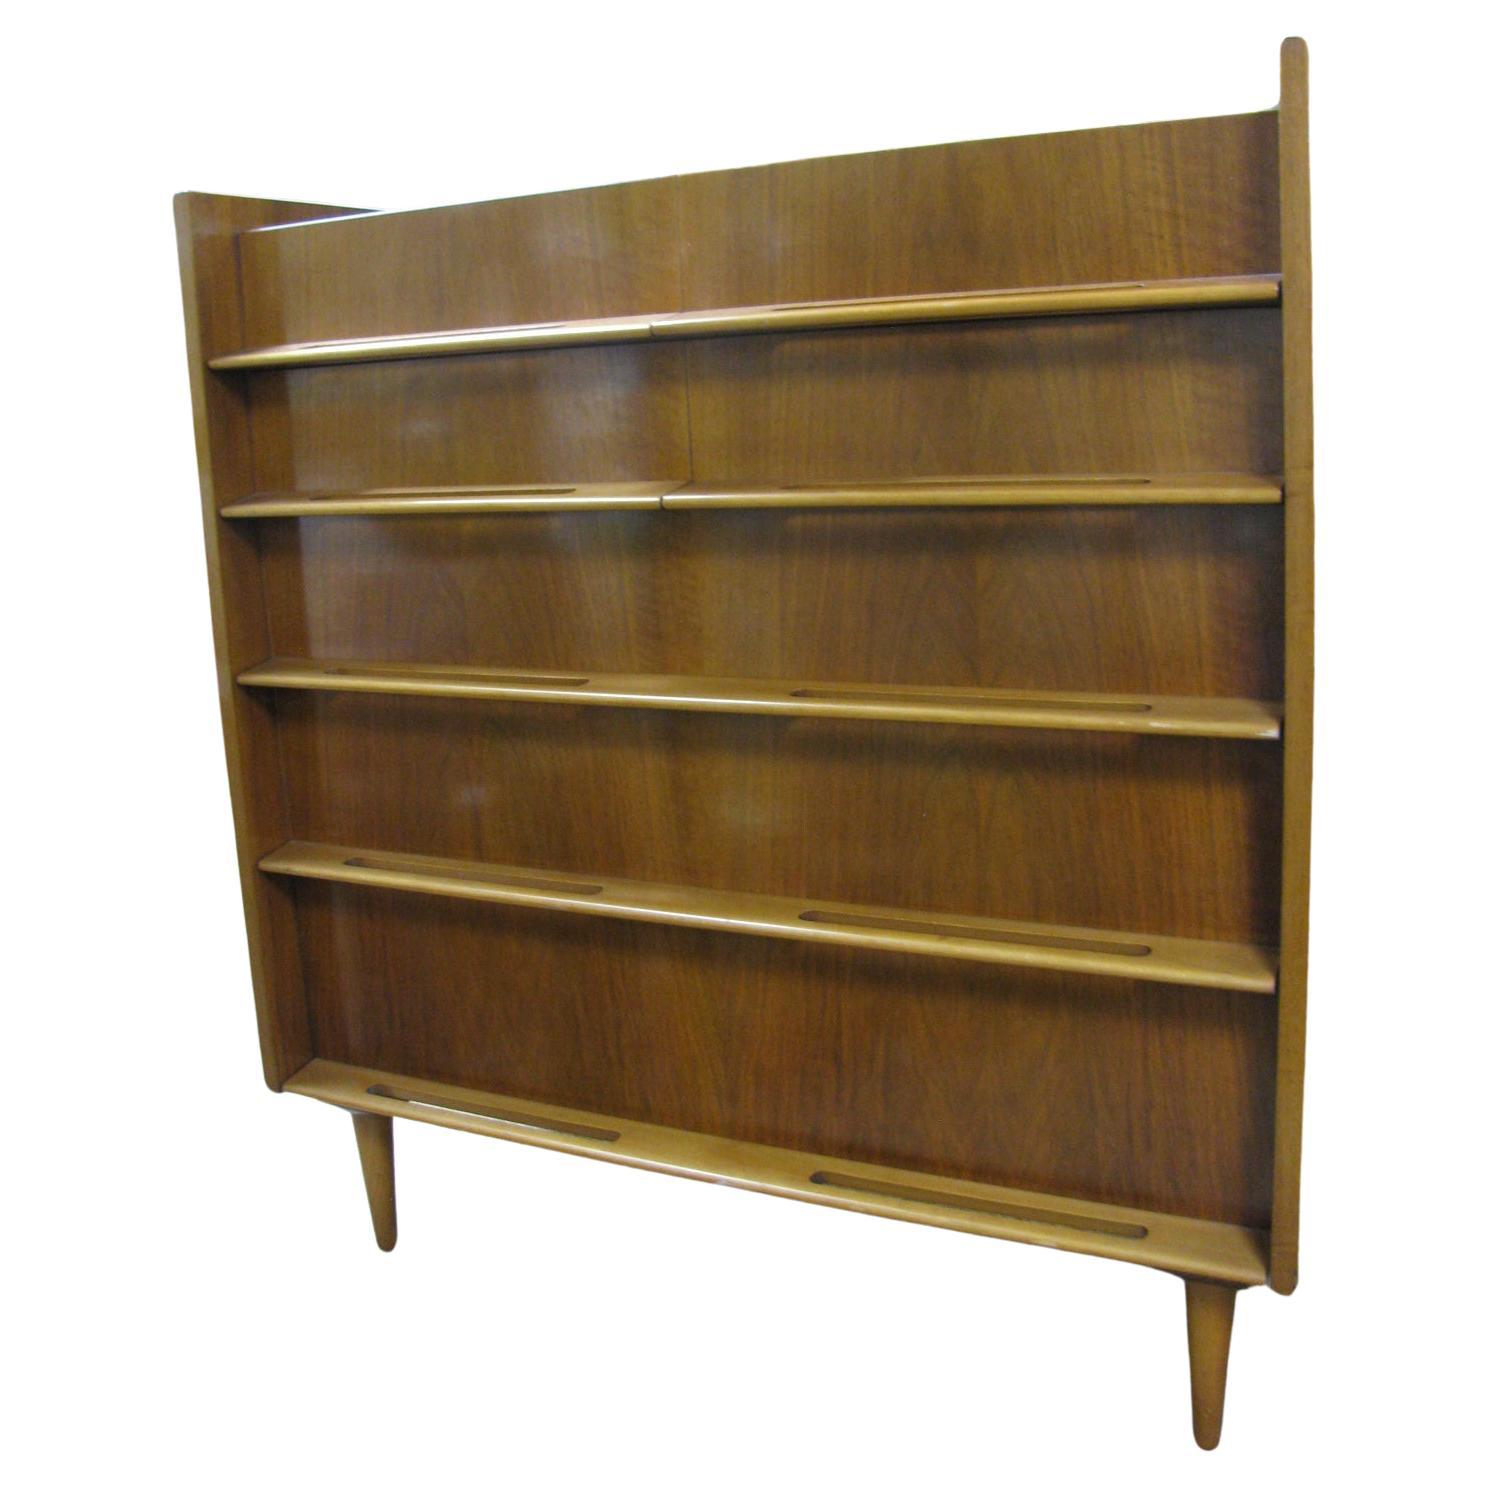 Edmond Spence Mid-Century Modern Walnut and Birch Tall Dresser Made in Sweden In Good Condition For Sale In Port Jervis, NY